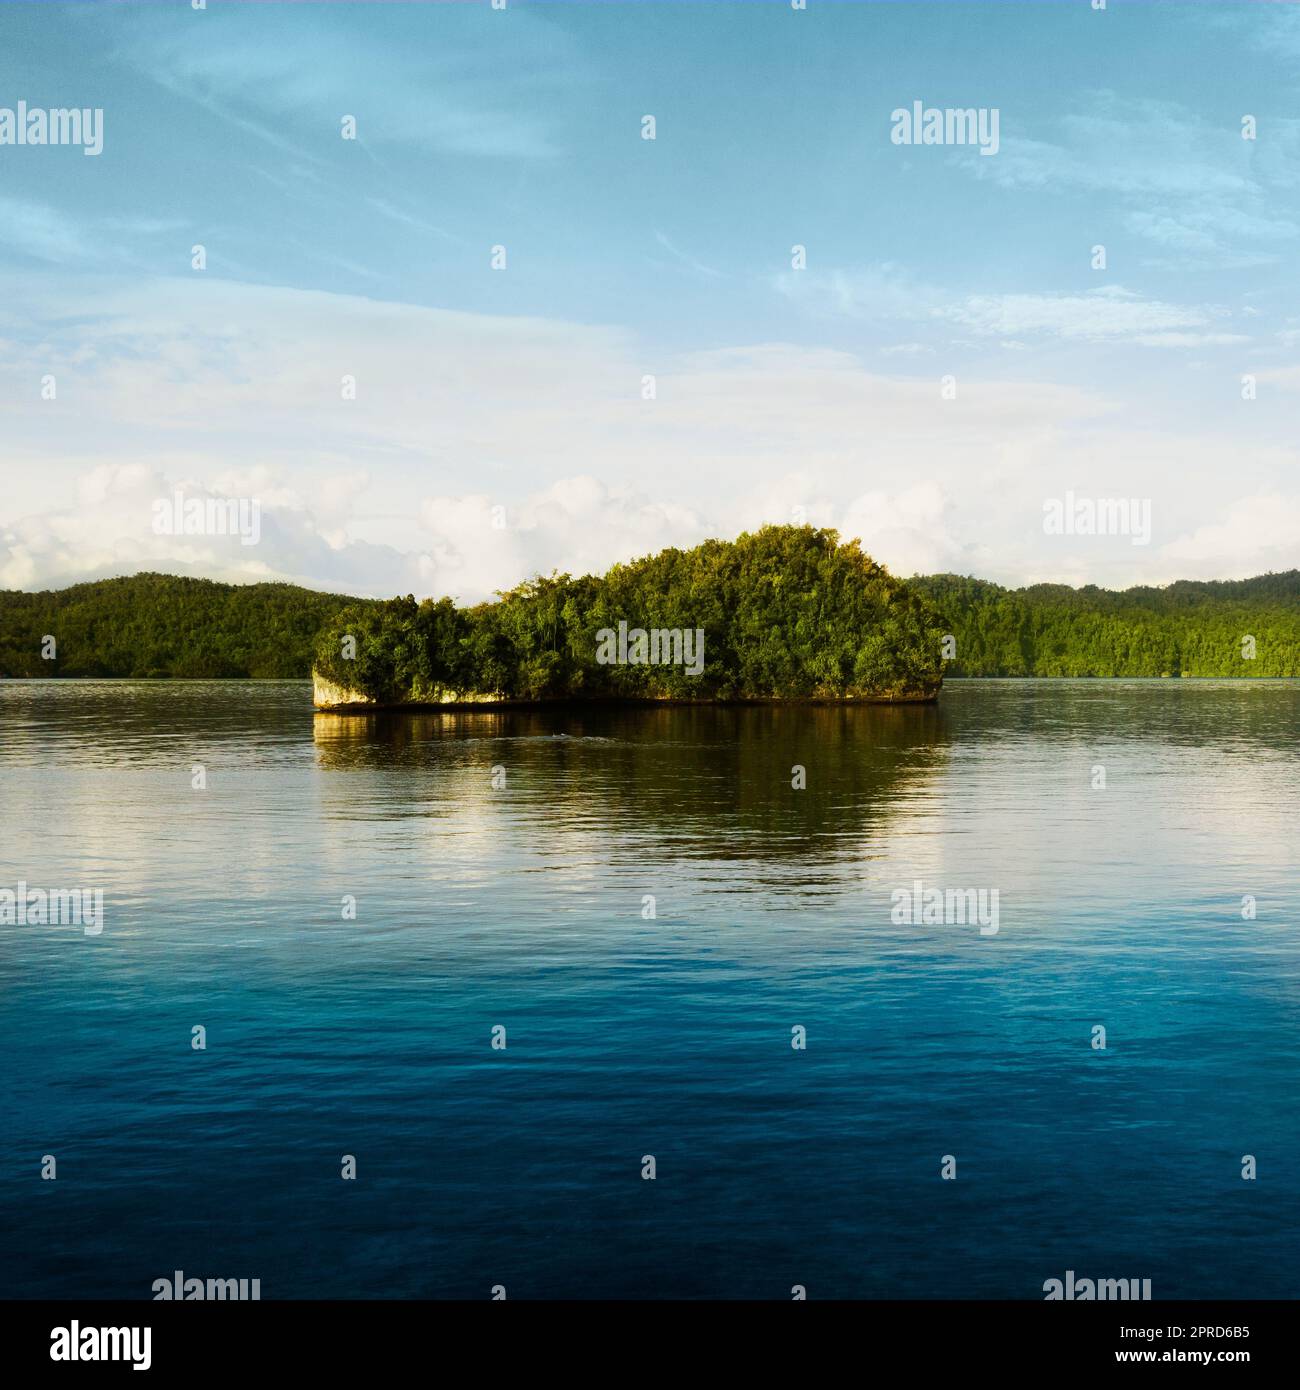 A place of peace. a beautiful island on a quiet lake. Stock Photo